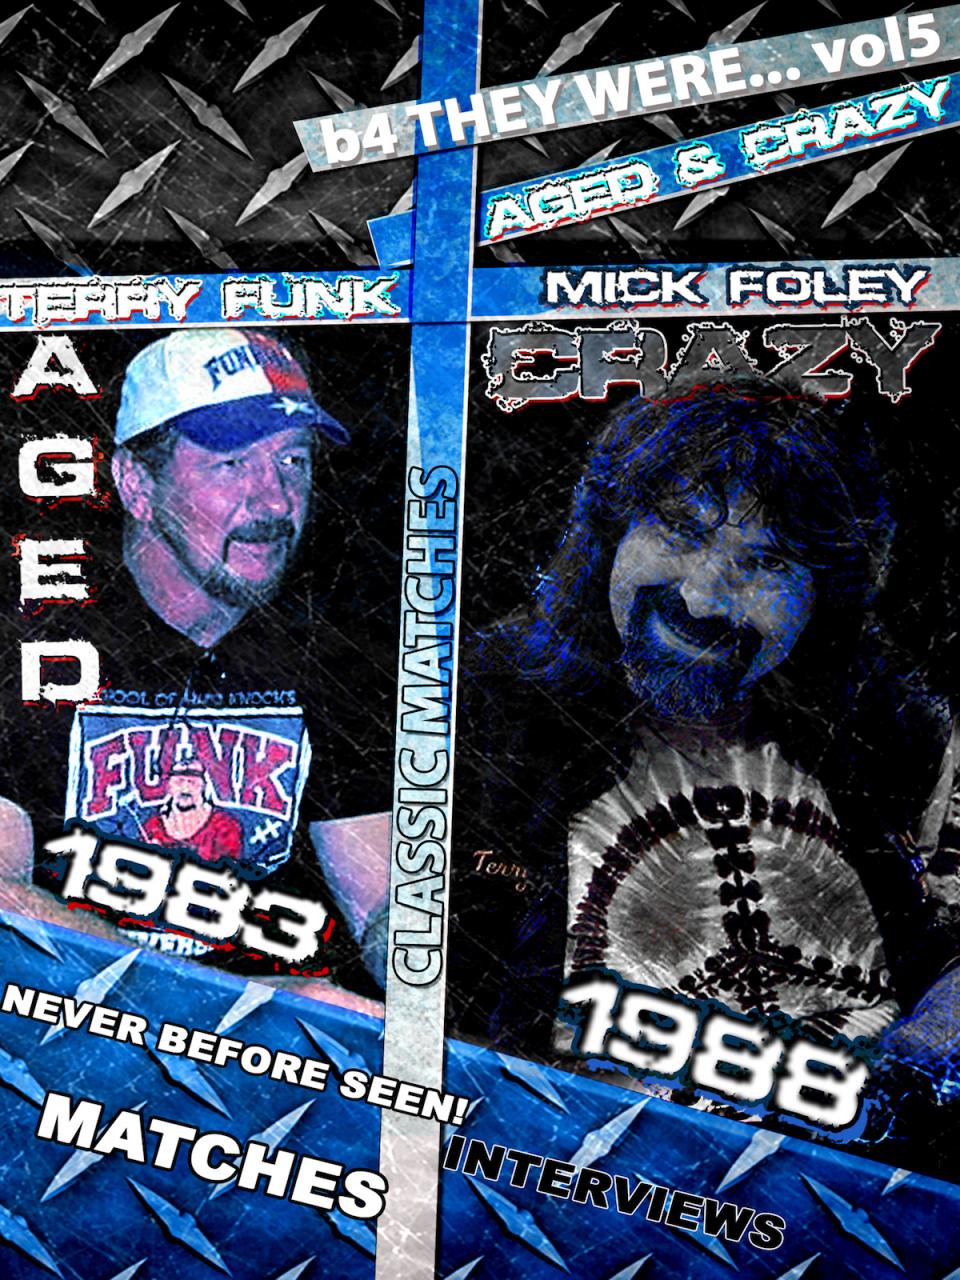 Before They Were Mick Foley and Terry Funk Vol. 5